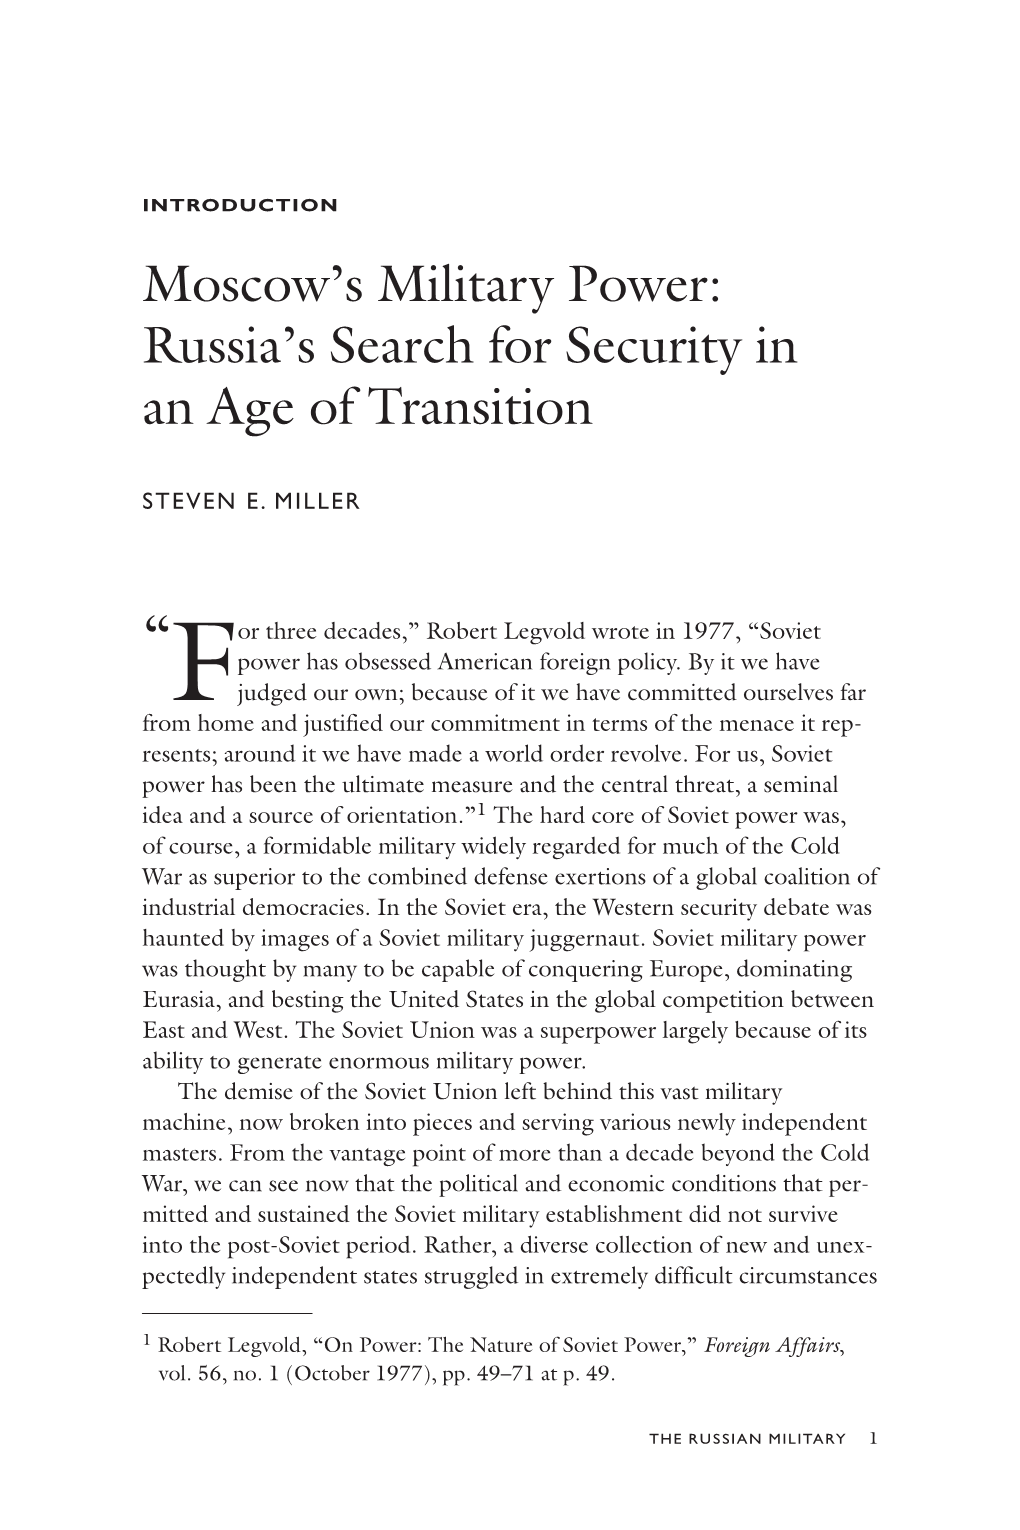 Moscow's Military Power: Russia's Search for Security in an Age Of